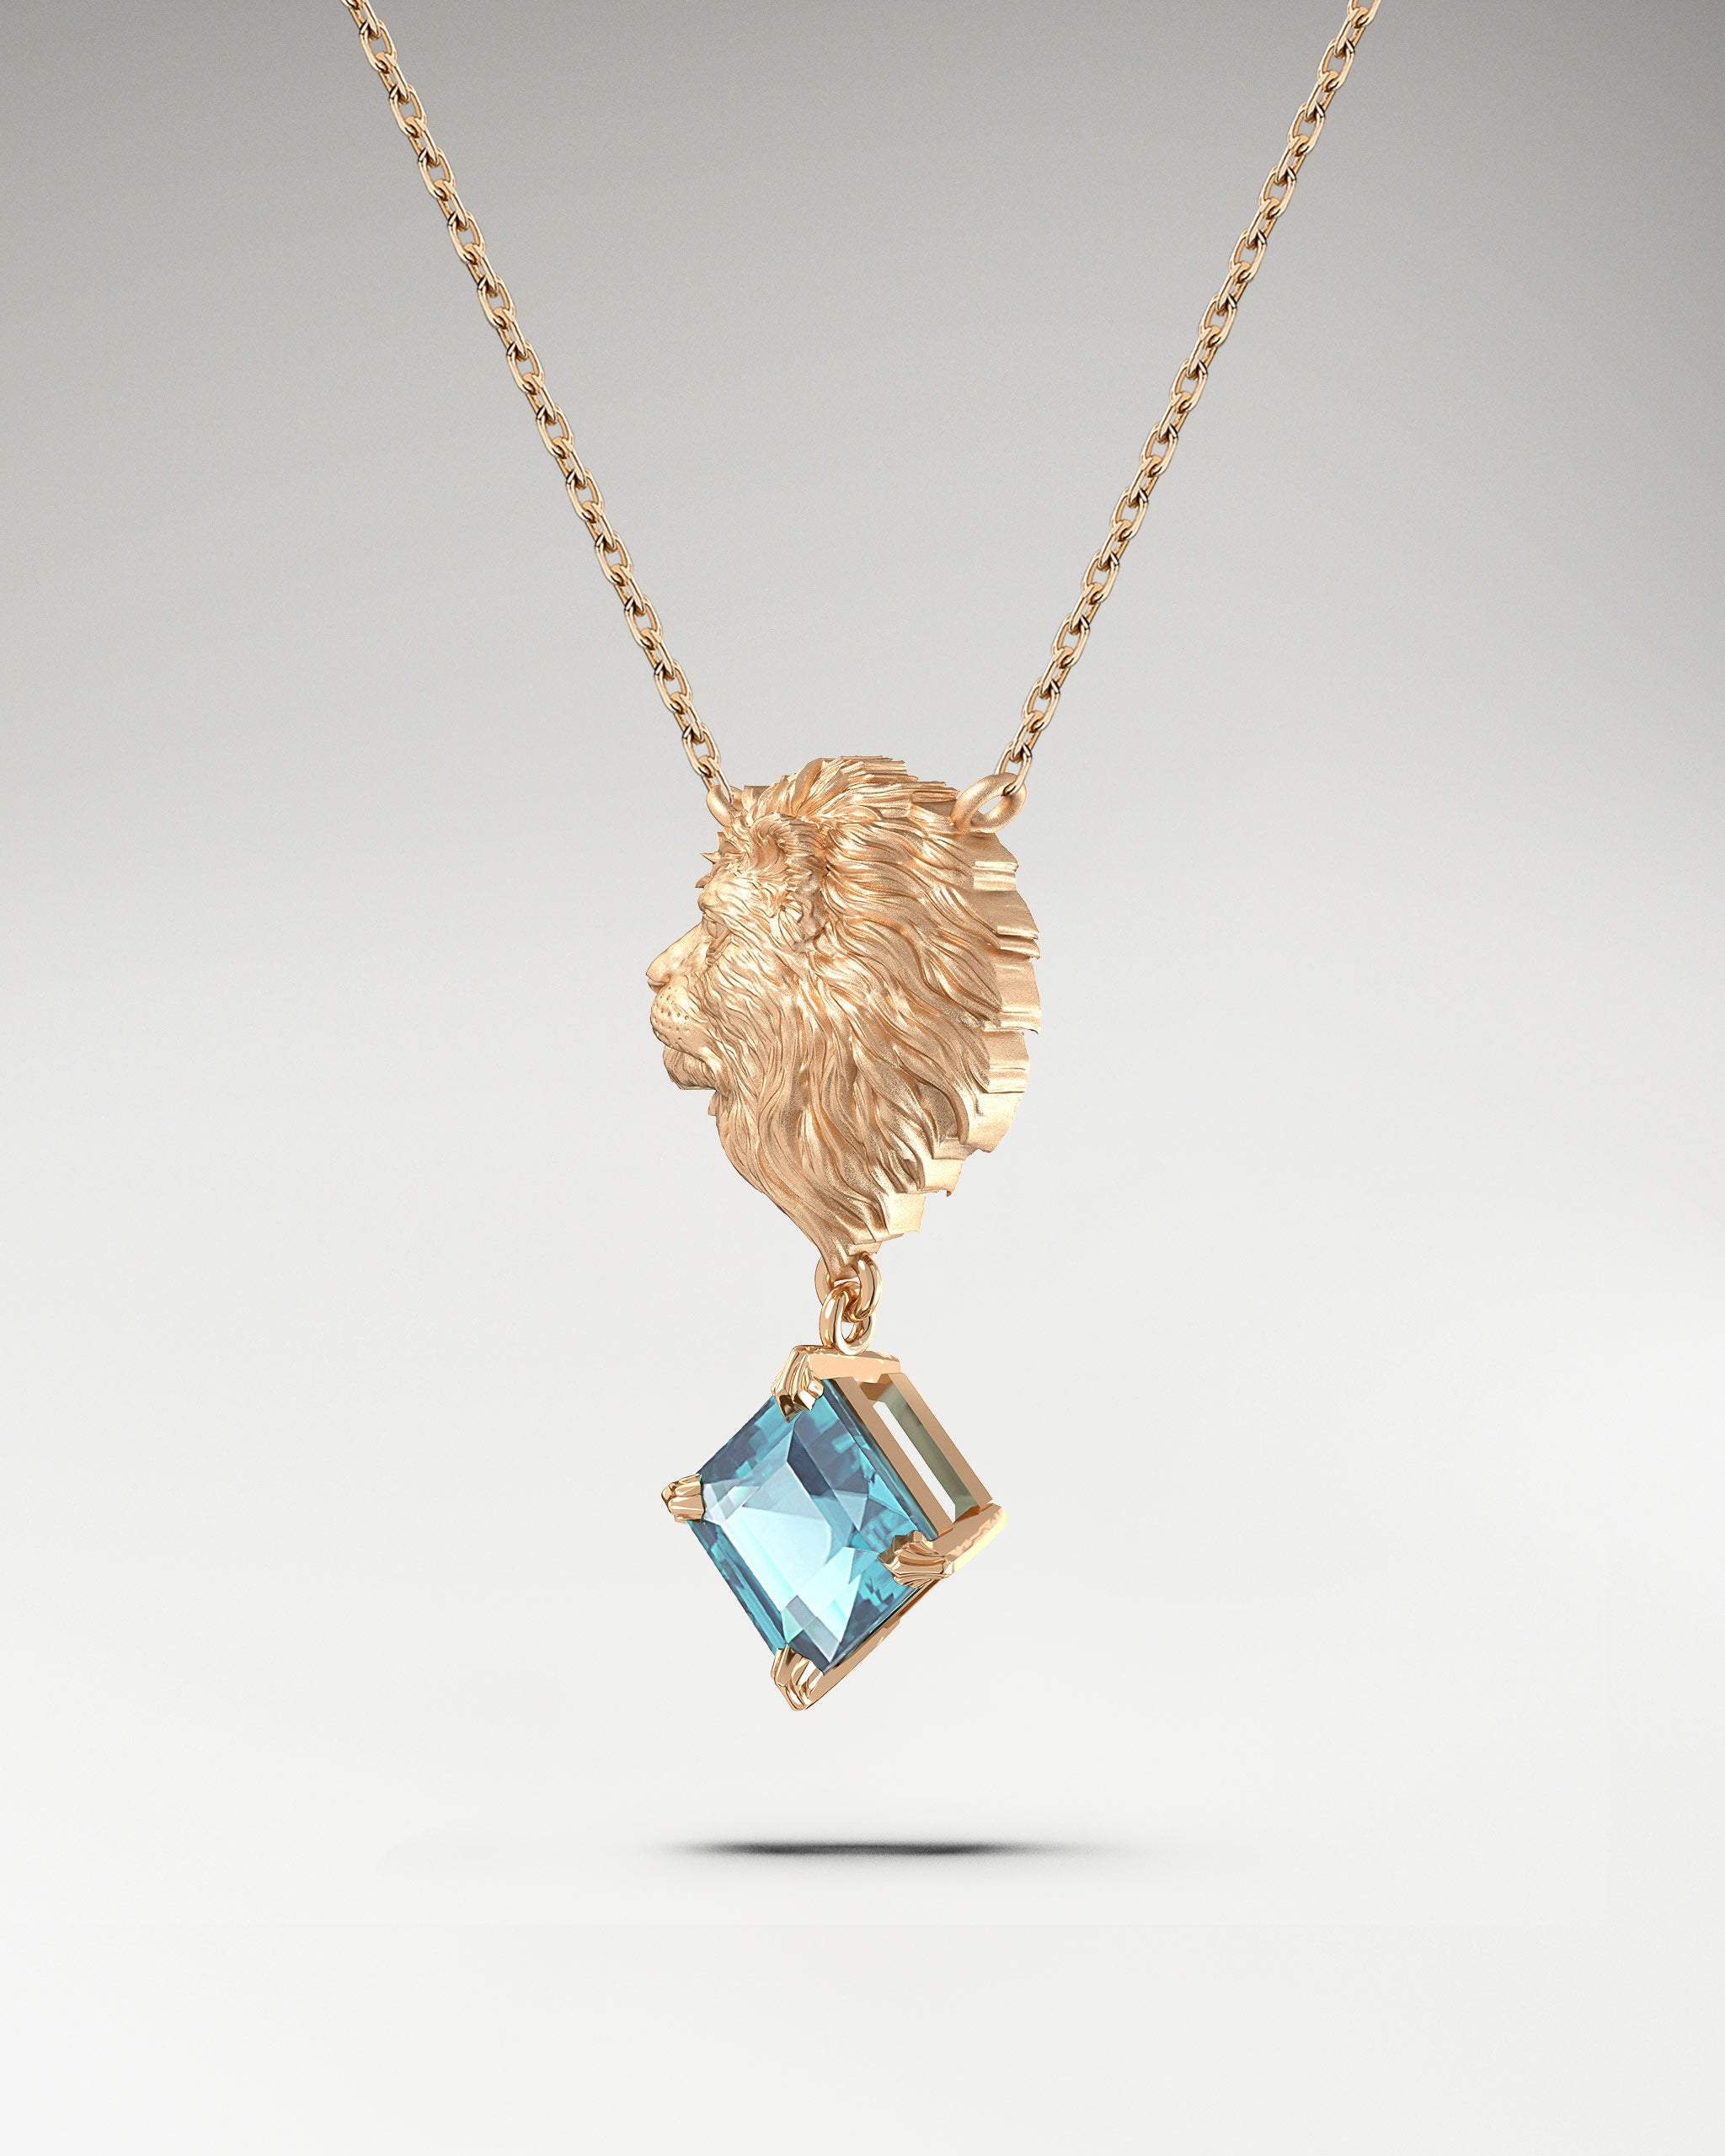 Lion Head Pendant Necklace in 10k gold with aquamarine